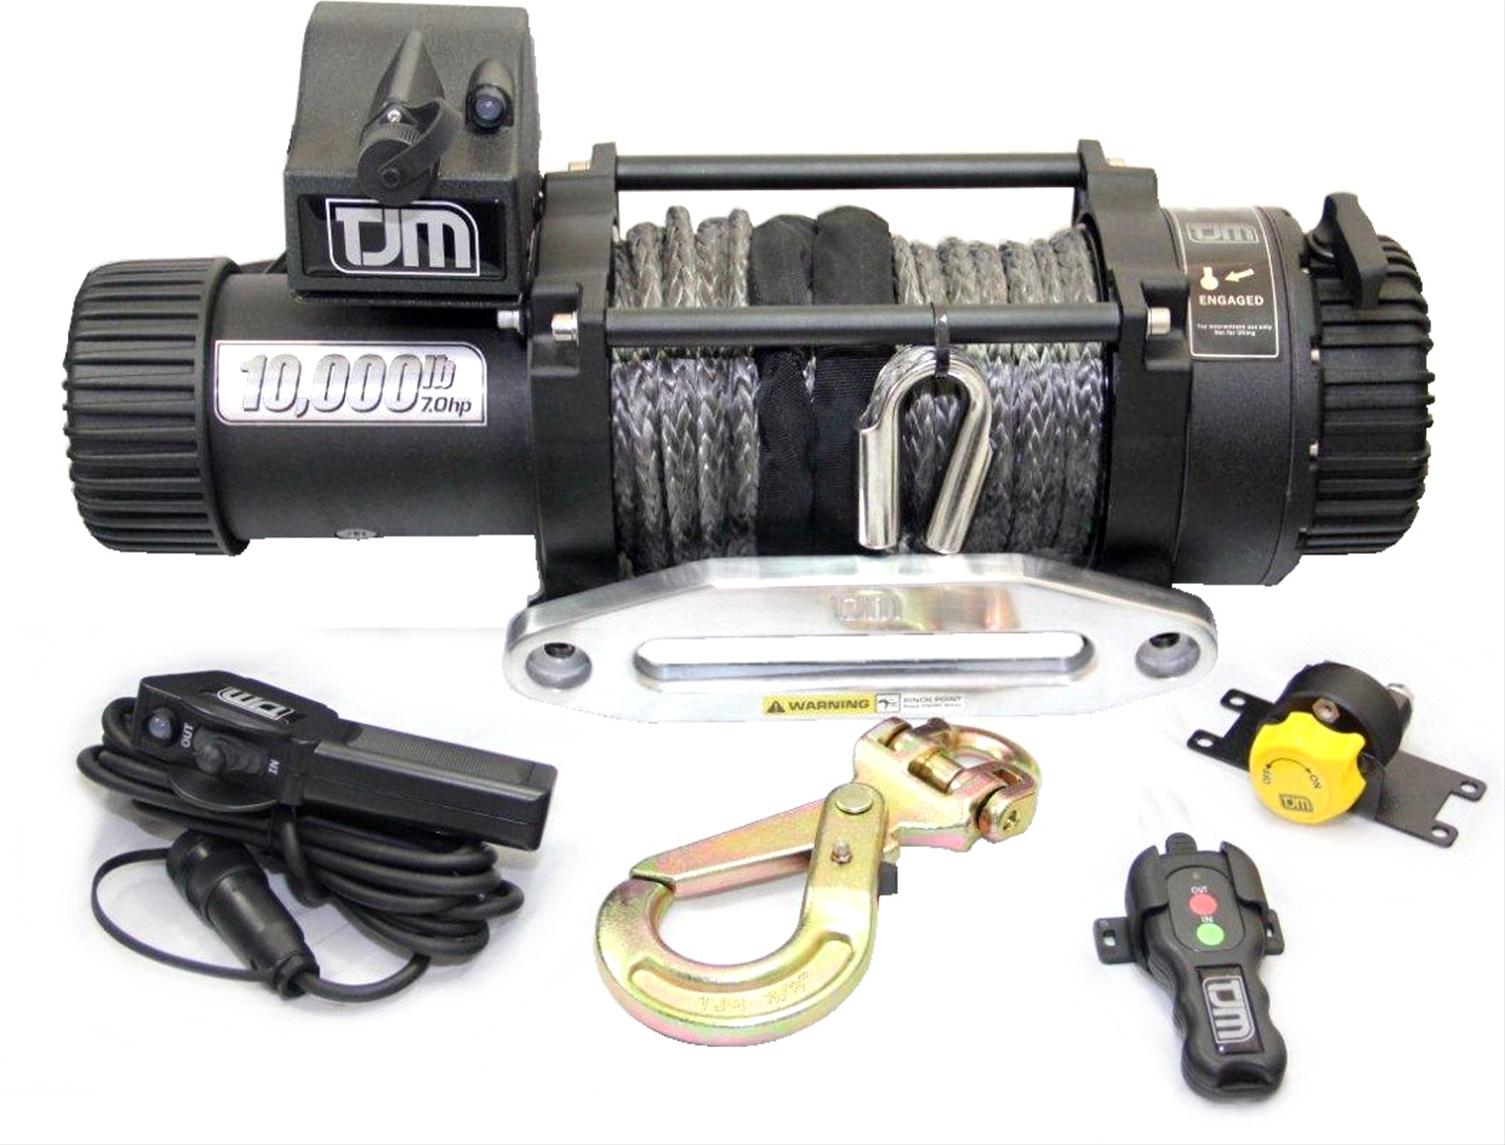 TJM Off-Road Stealth Winch, 10,000 Lb. Pull Rating